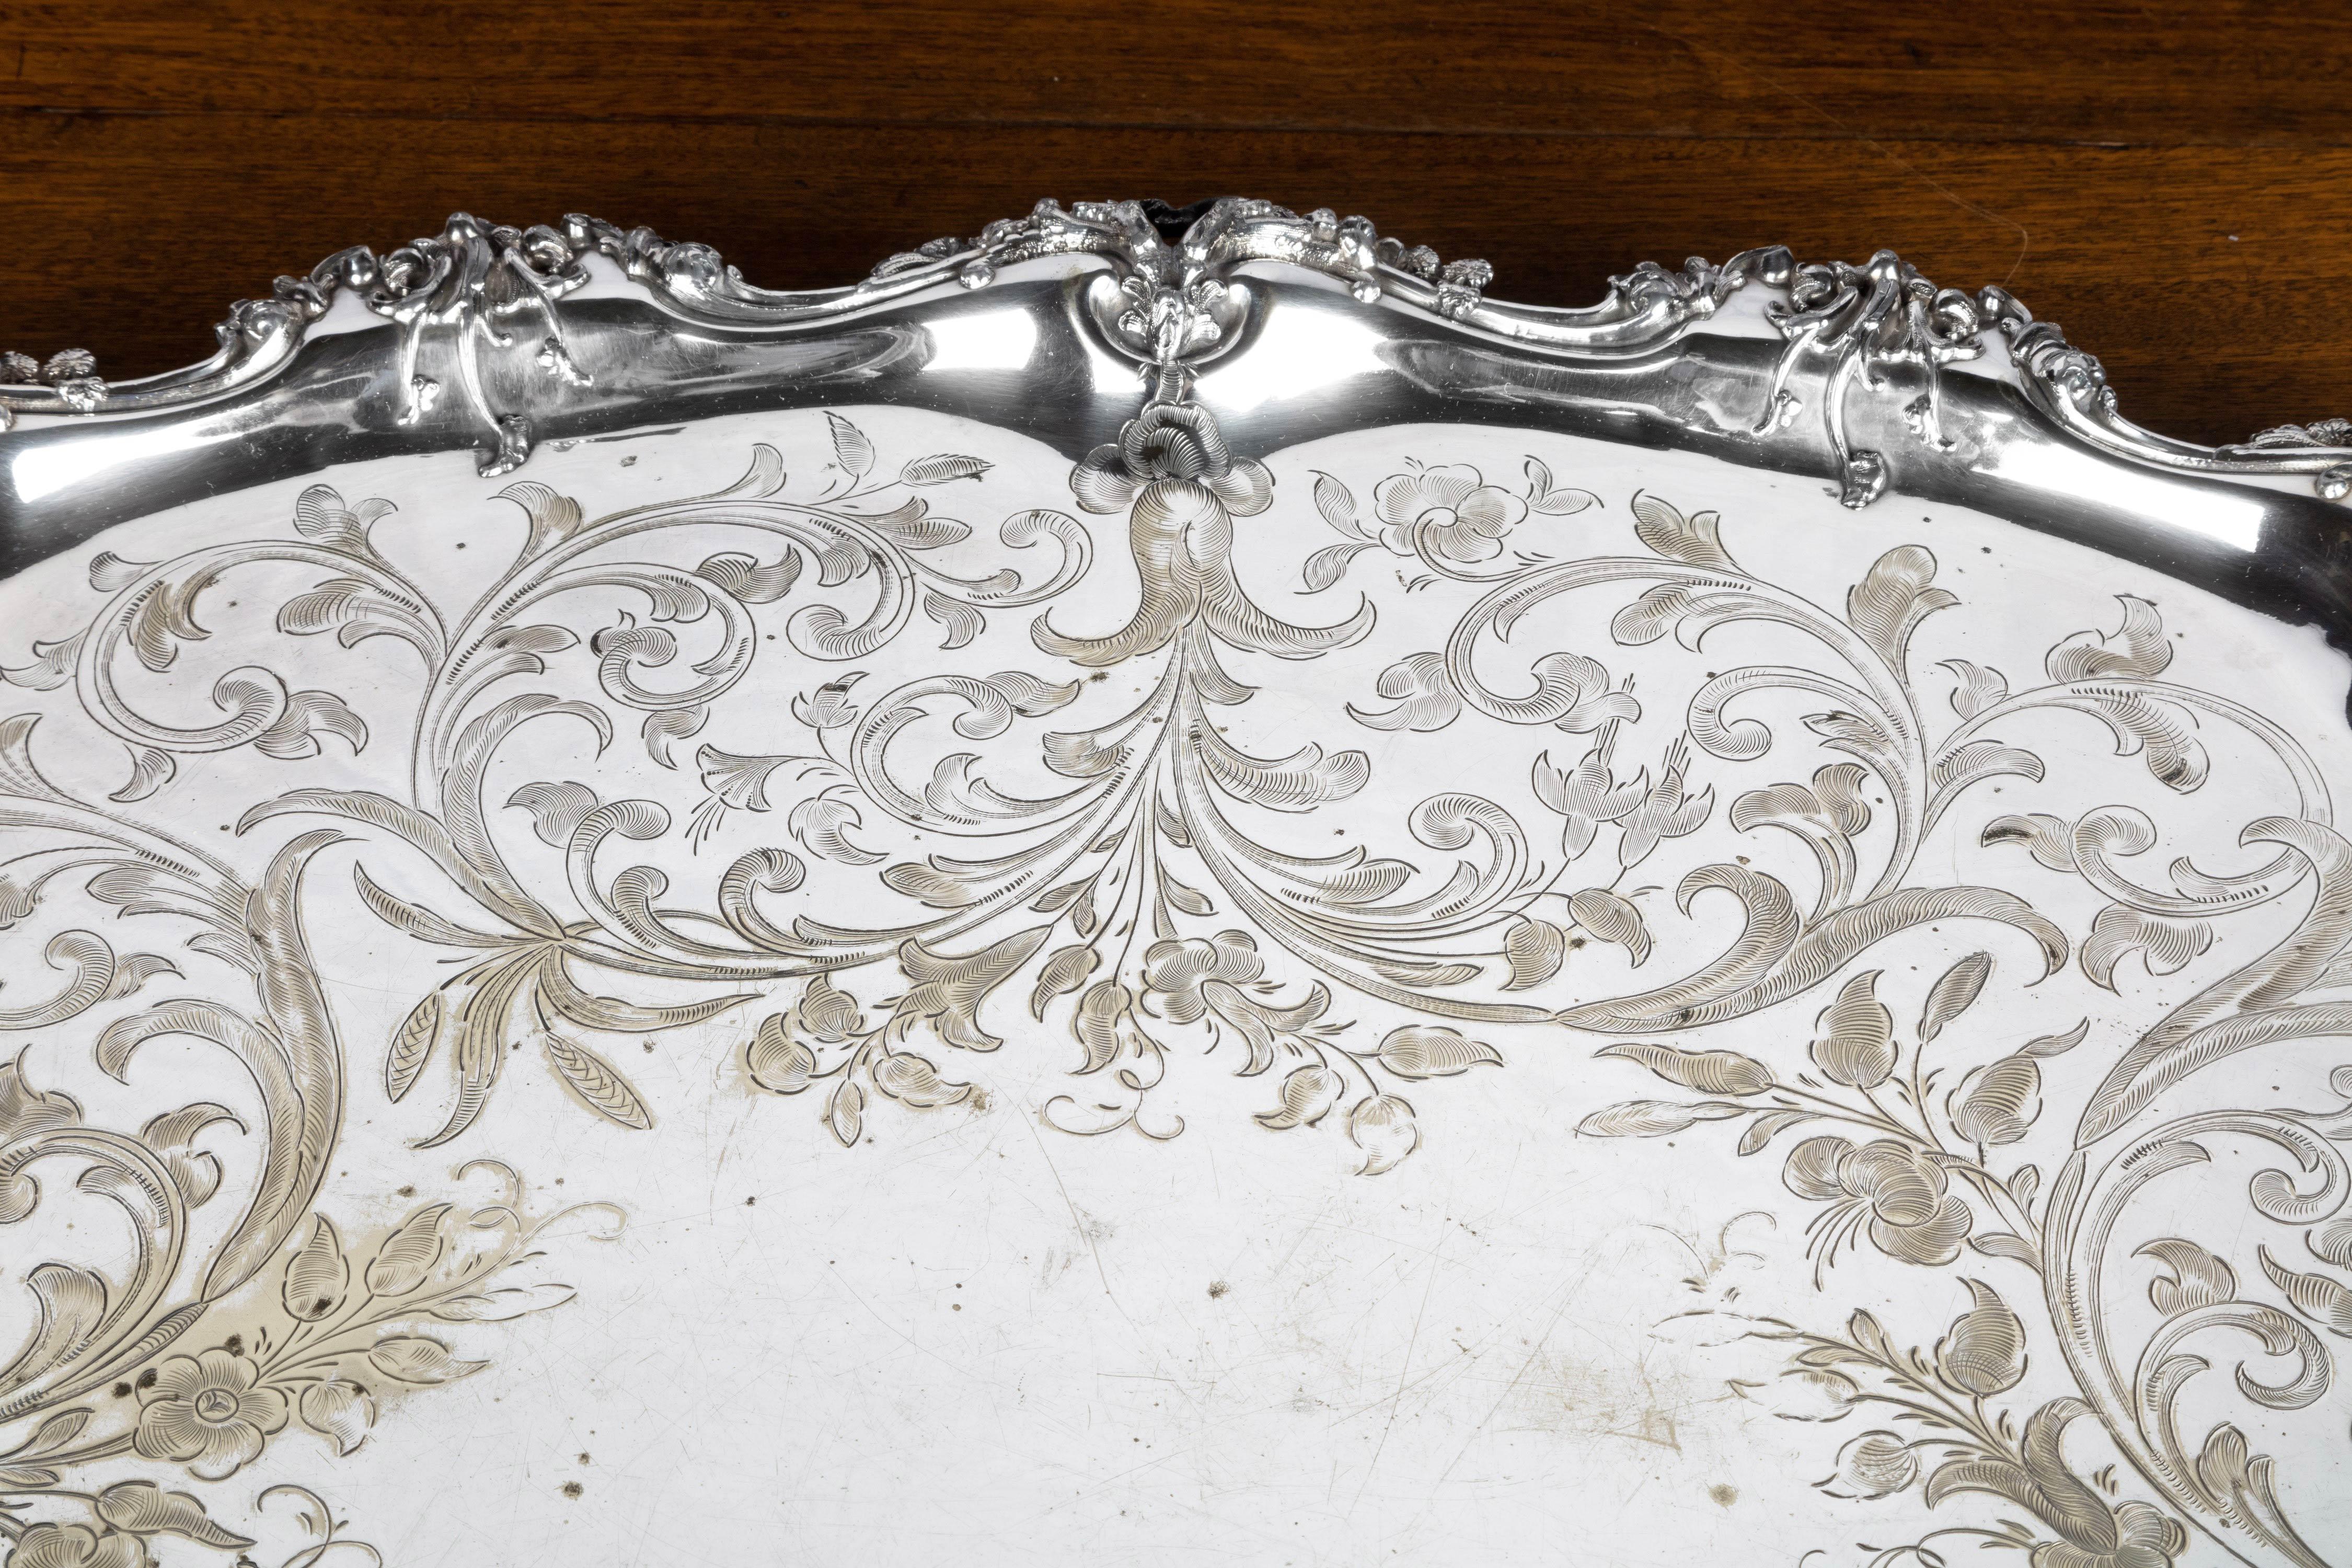 A quite magnificent late Victorian silver plated tray. With an elaborately wavy cast, chiselled and engraved border of foliage. Of the very best quality.